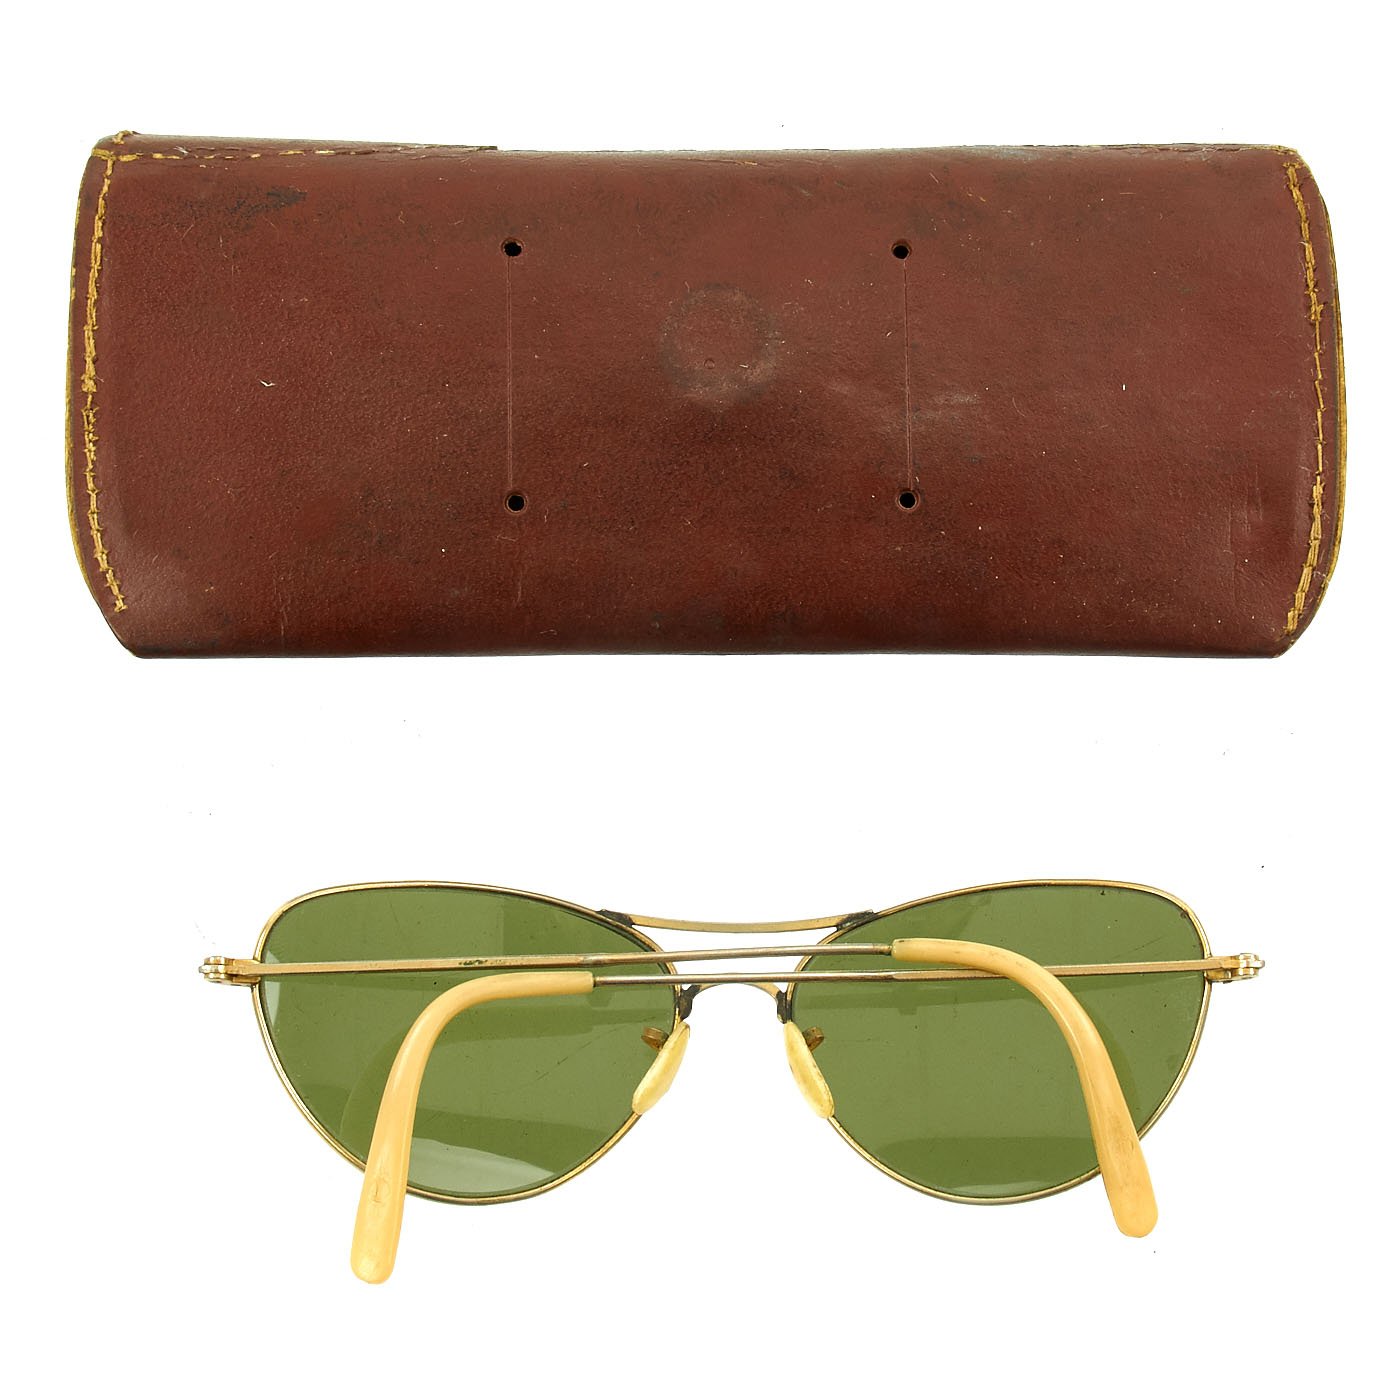 Original WWII USAAF Cat's Eye Aviator Sunglasses with Army Air Forces ...